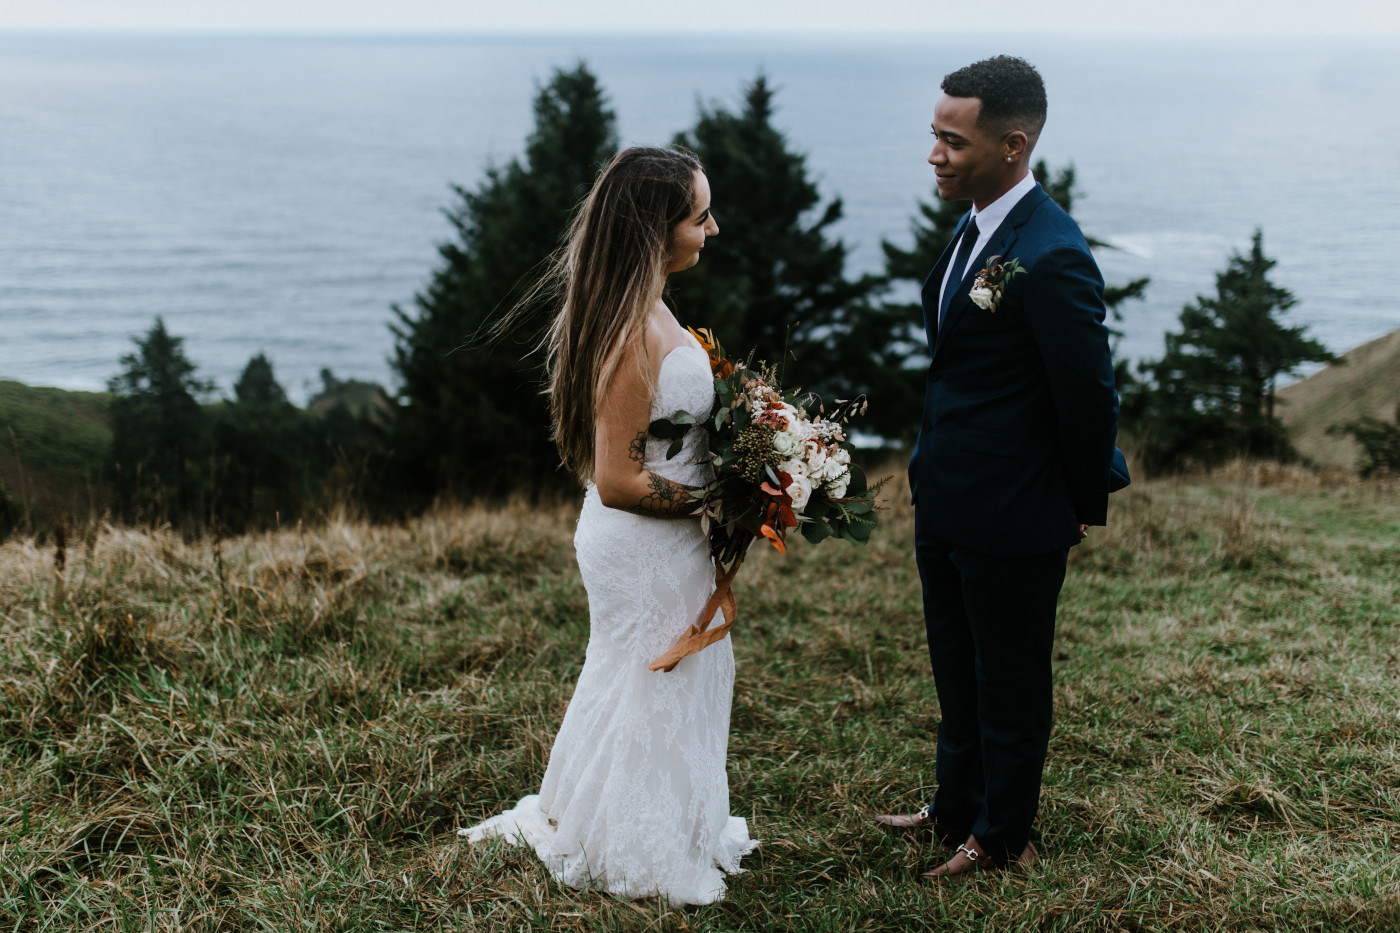 Ariana and Deandre prepare to say I do. Elopement photography at Mount Hood by Sienna Plus Josh.